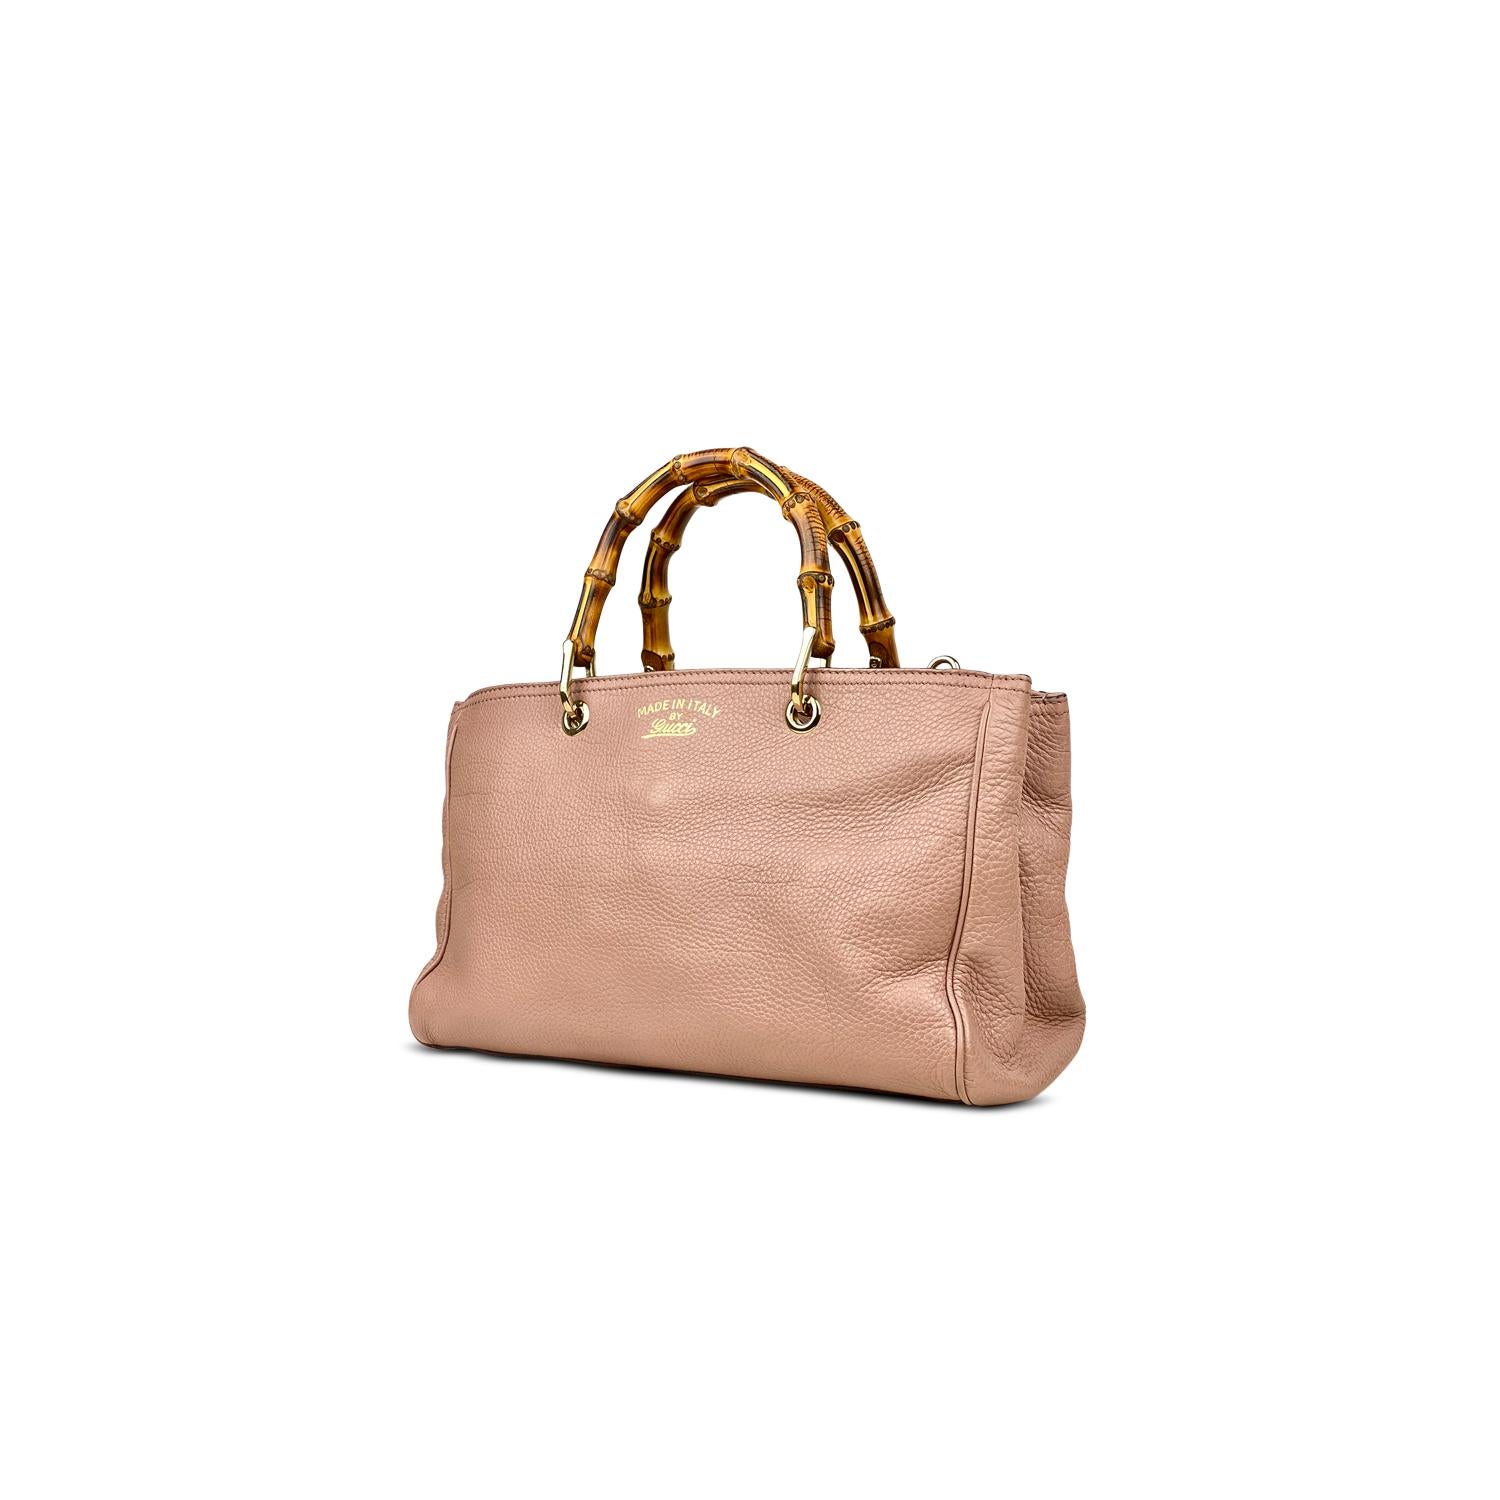 Pink grained leather Gucci Medium Shopper tote with

- Silver-tone hardware
- Removable single flat shoulder strap with buckle adjustment
- Dual bamboo top handles, foil-stamped logo at front face, protective metal feet at base, three interior